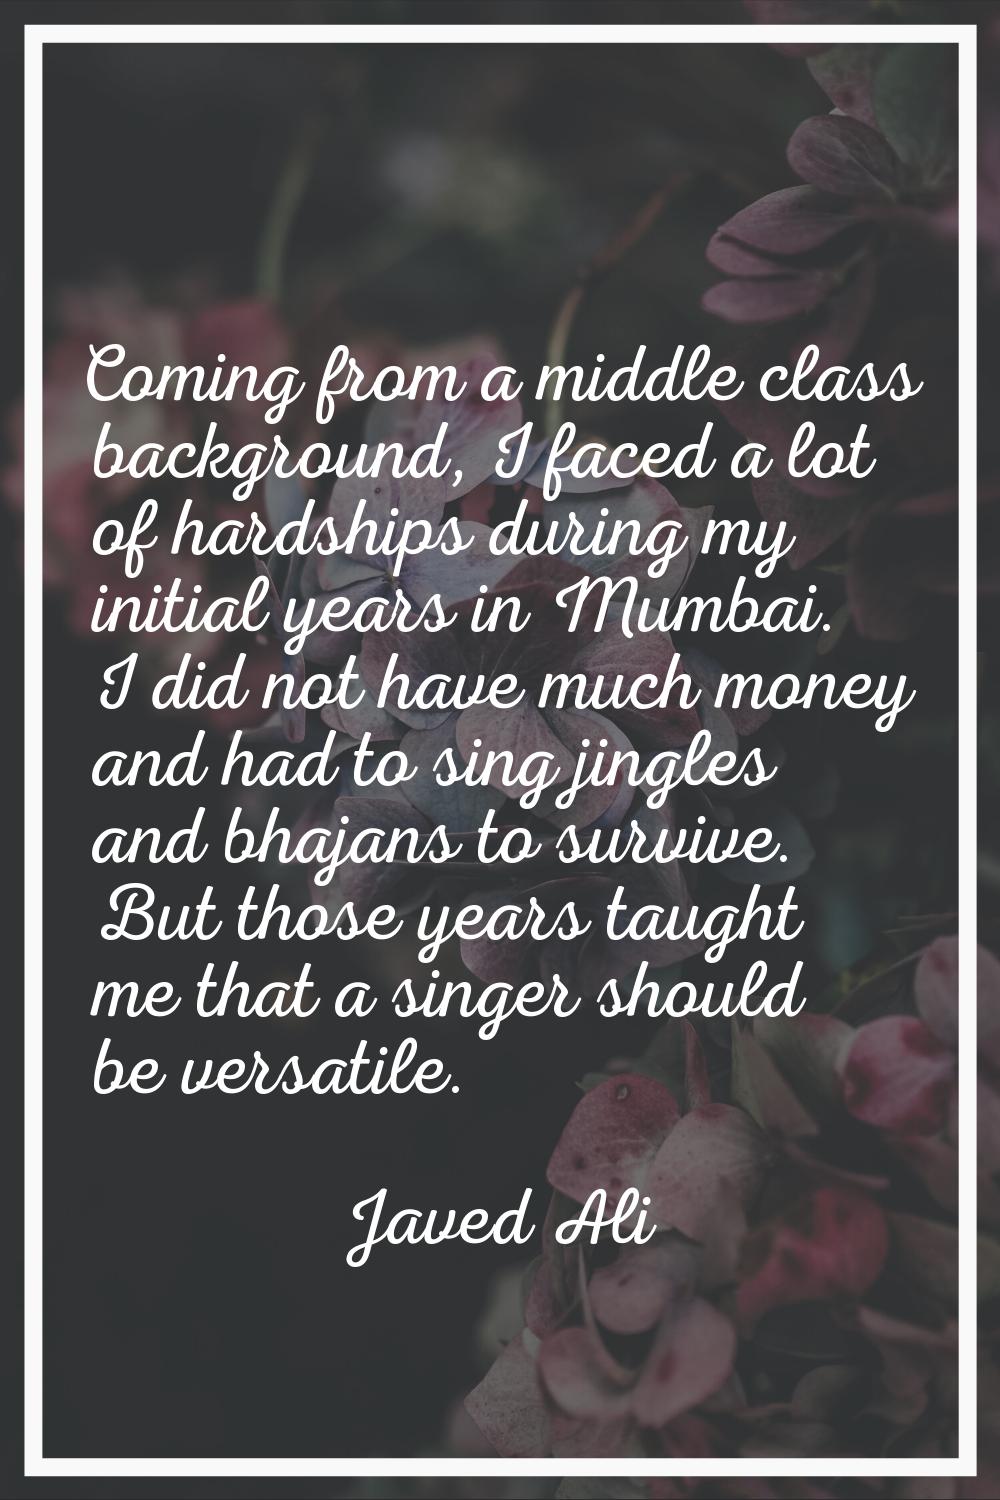 Coming from a middle class background, I faced a lot of hardships during my initial years in Mumbai